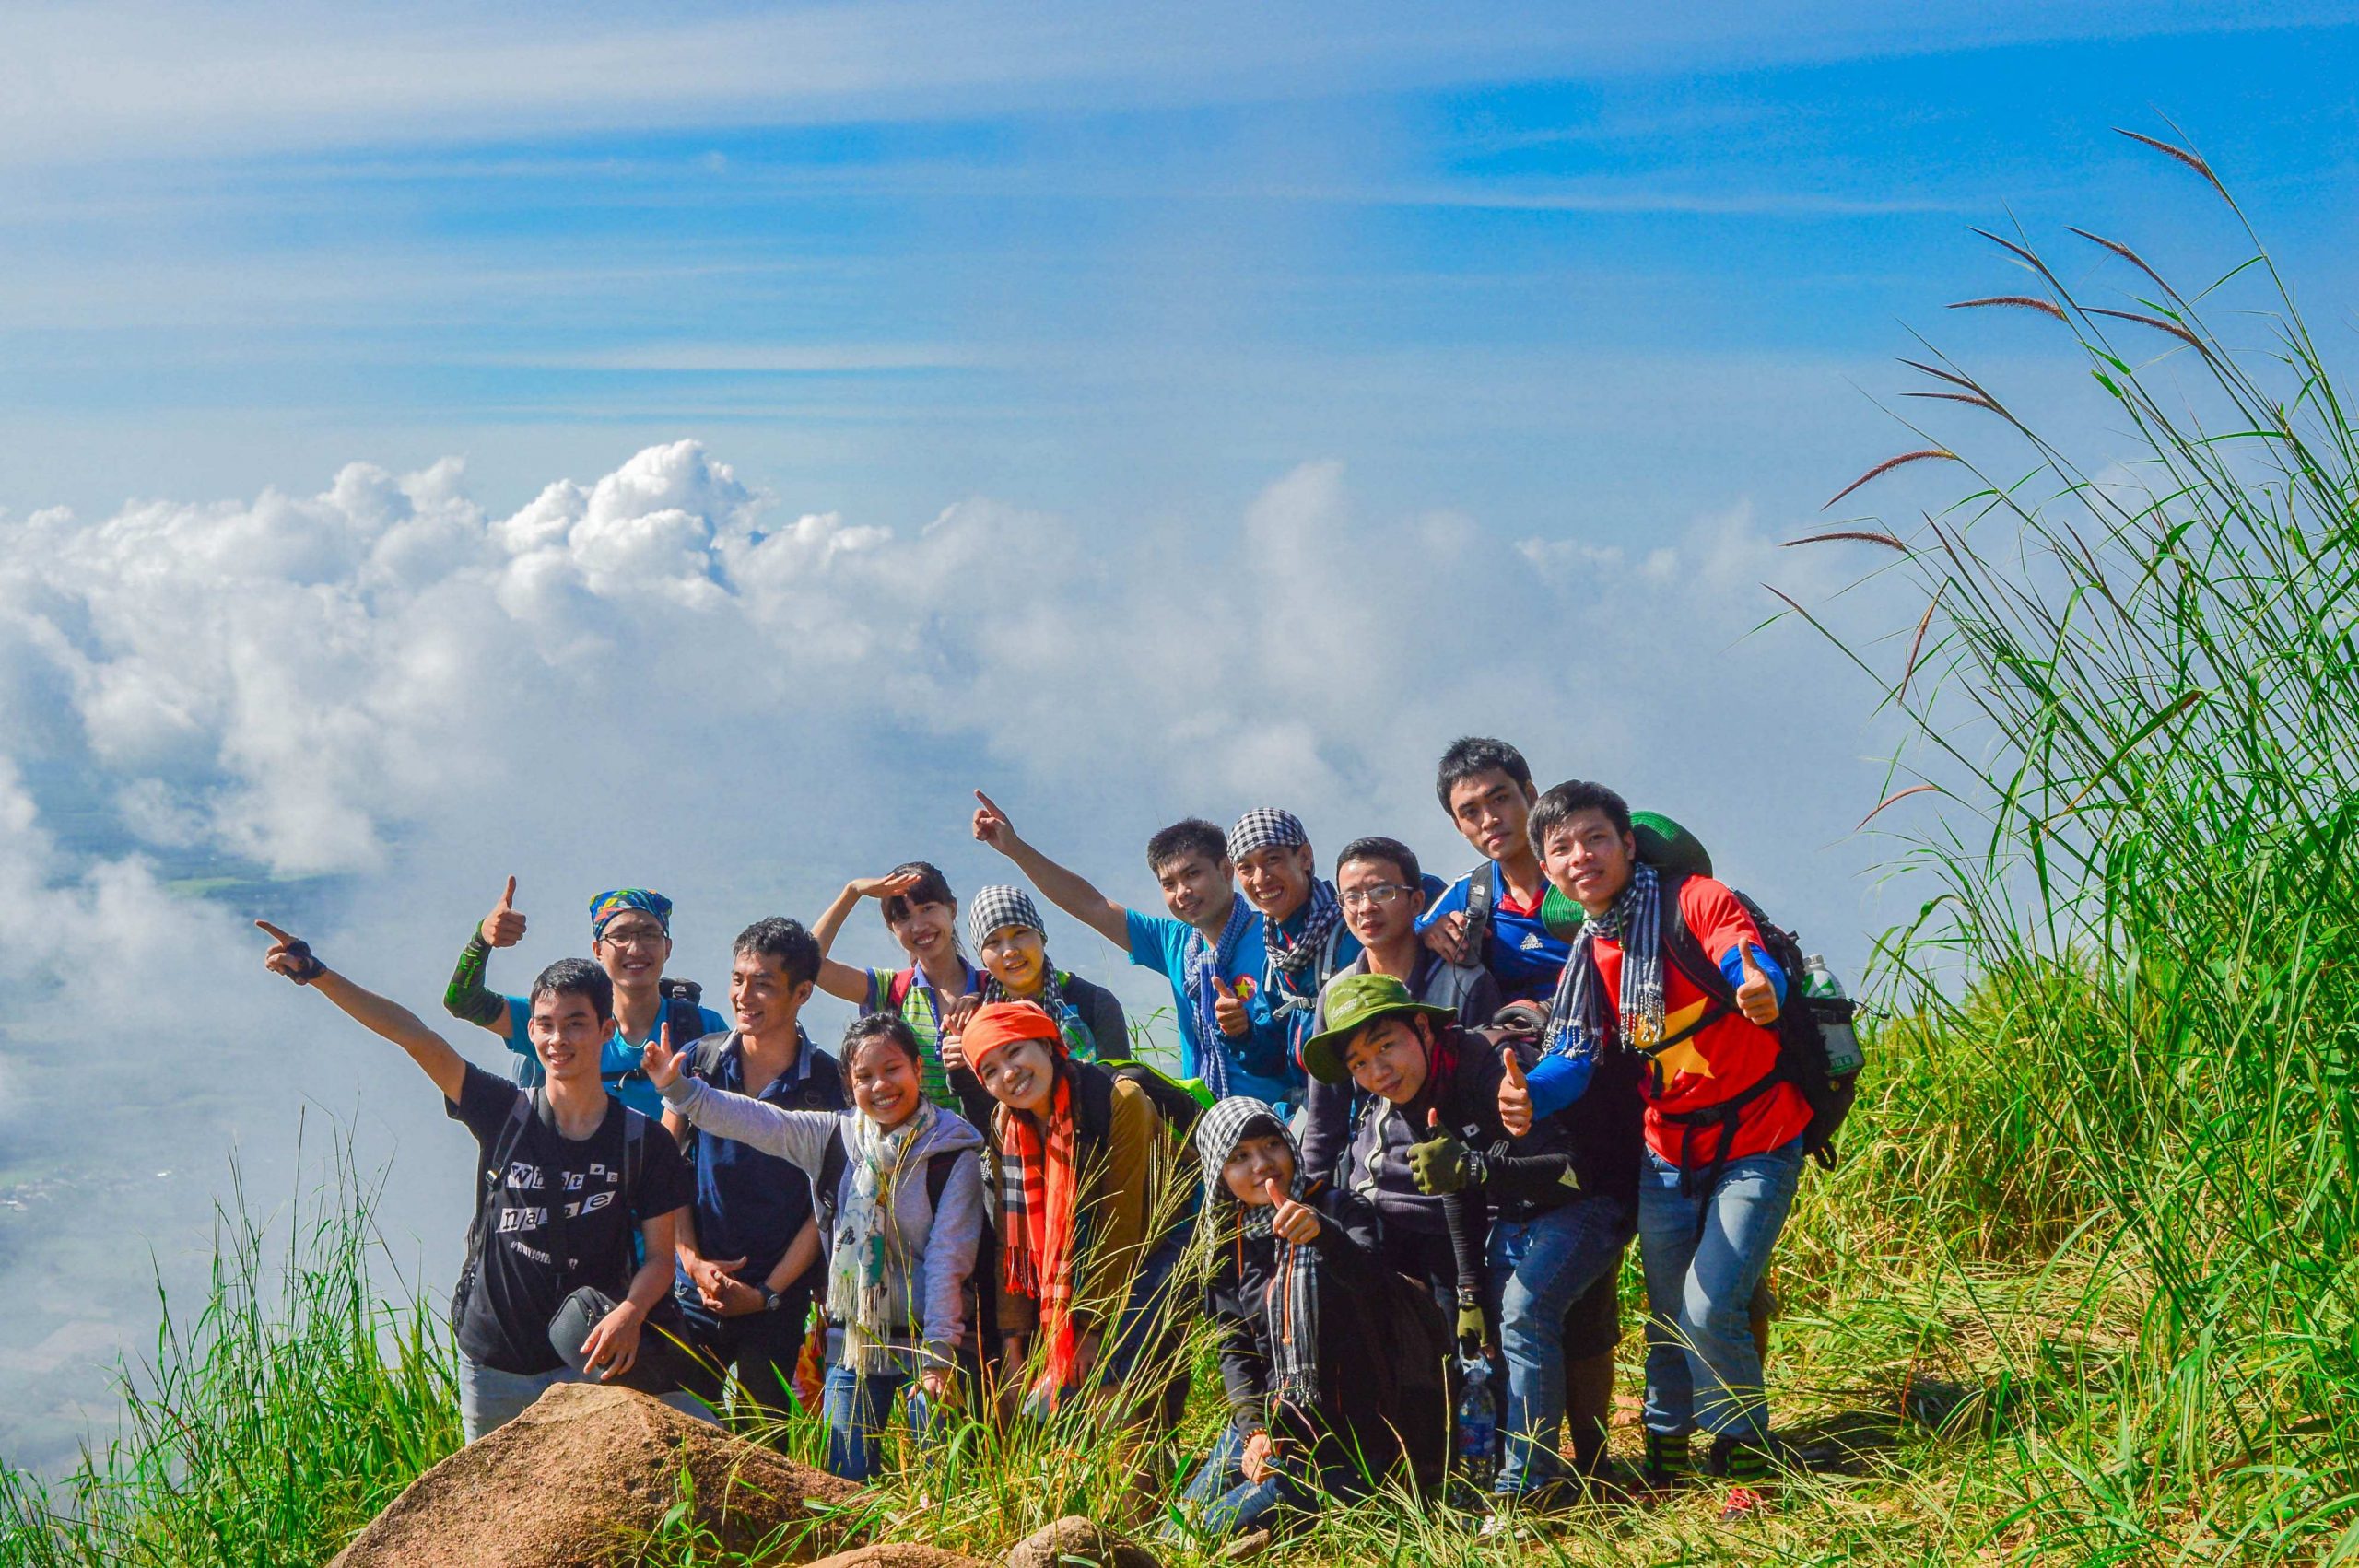 Soar to new heights! Get some amazing views and make memories that will last a lifetime on the journey up Lang Biang